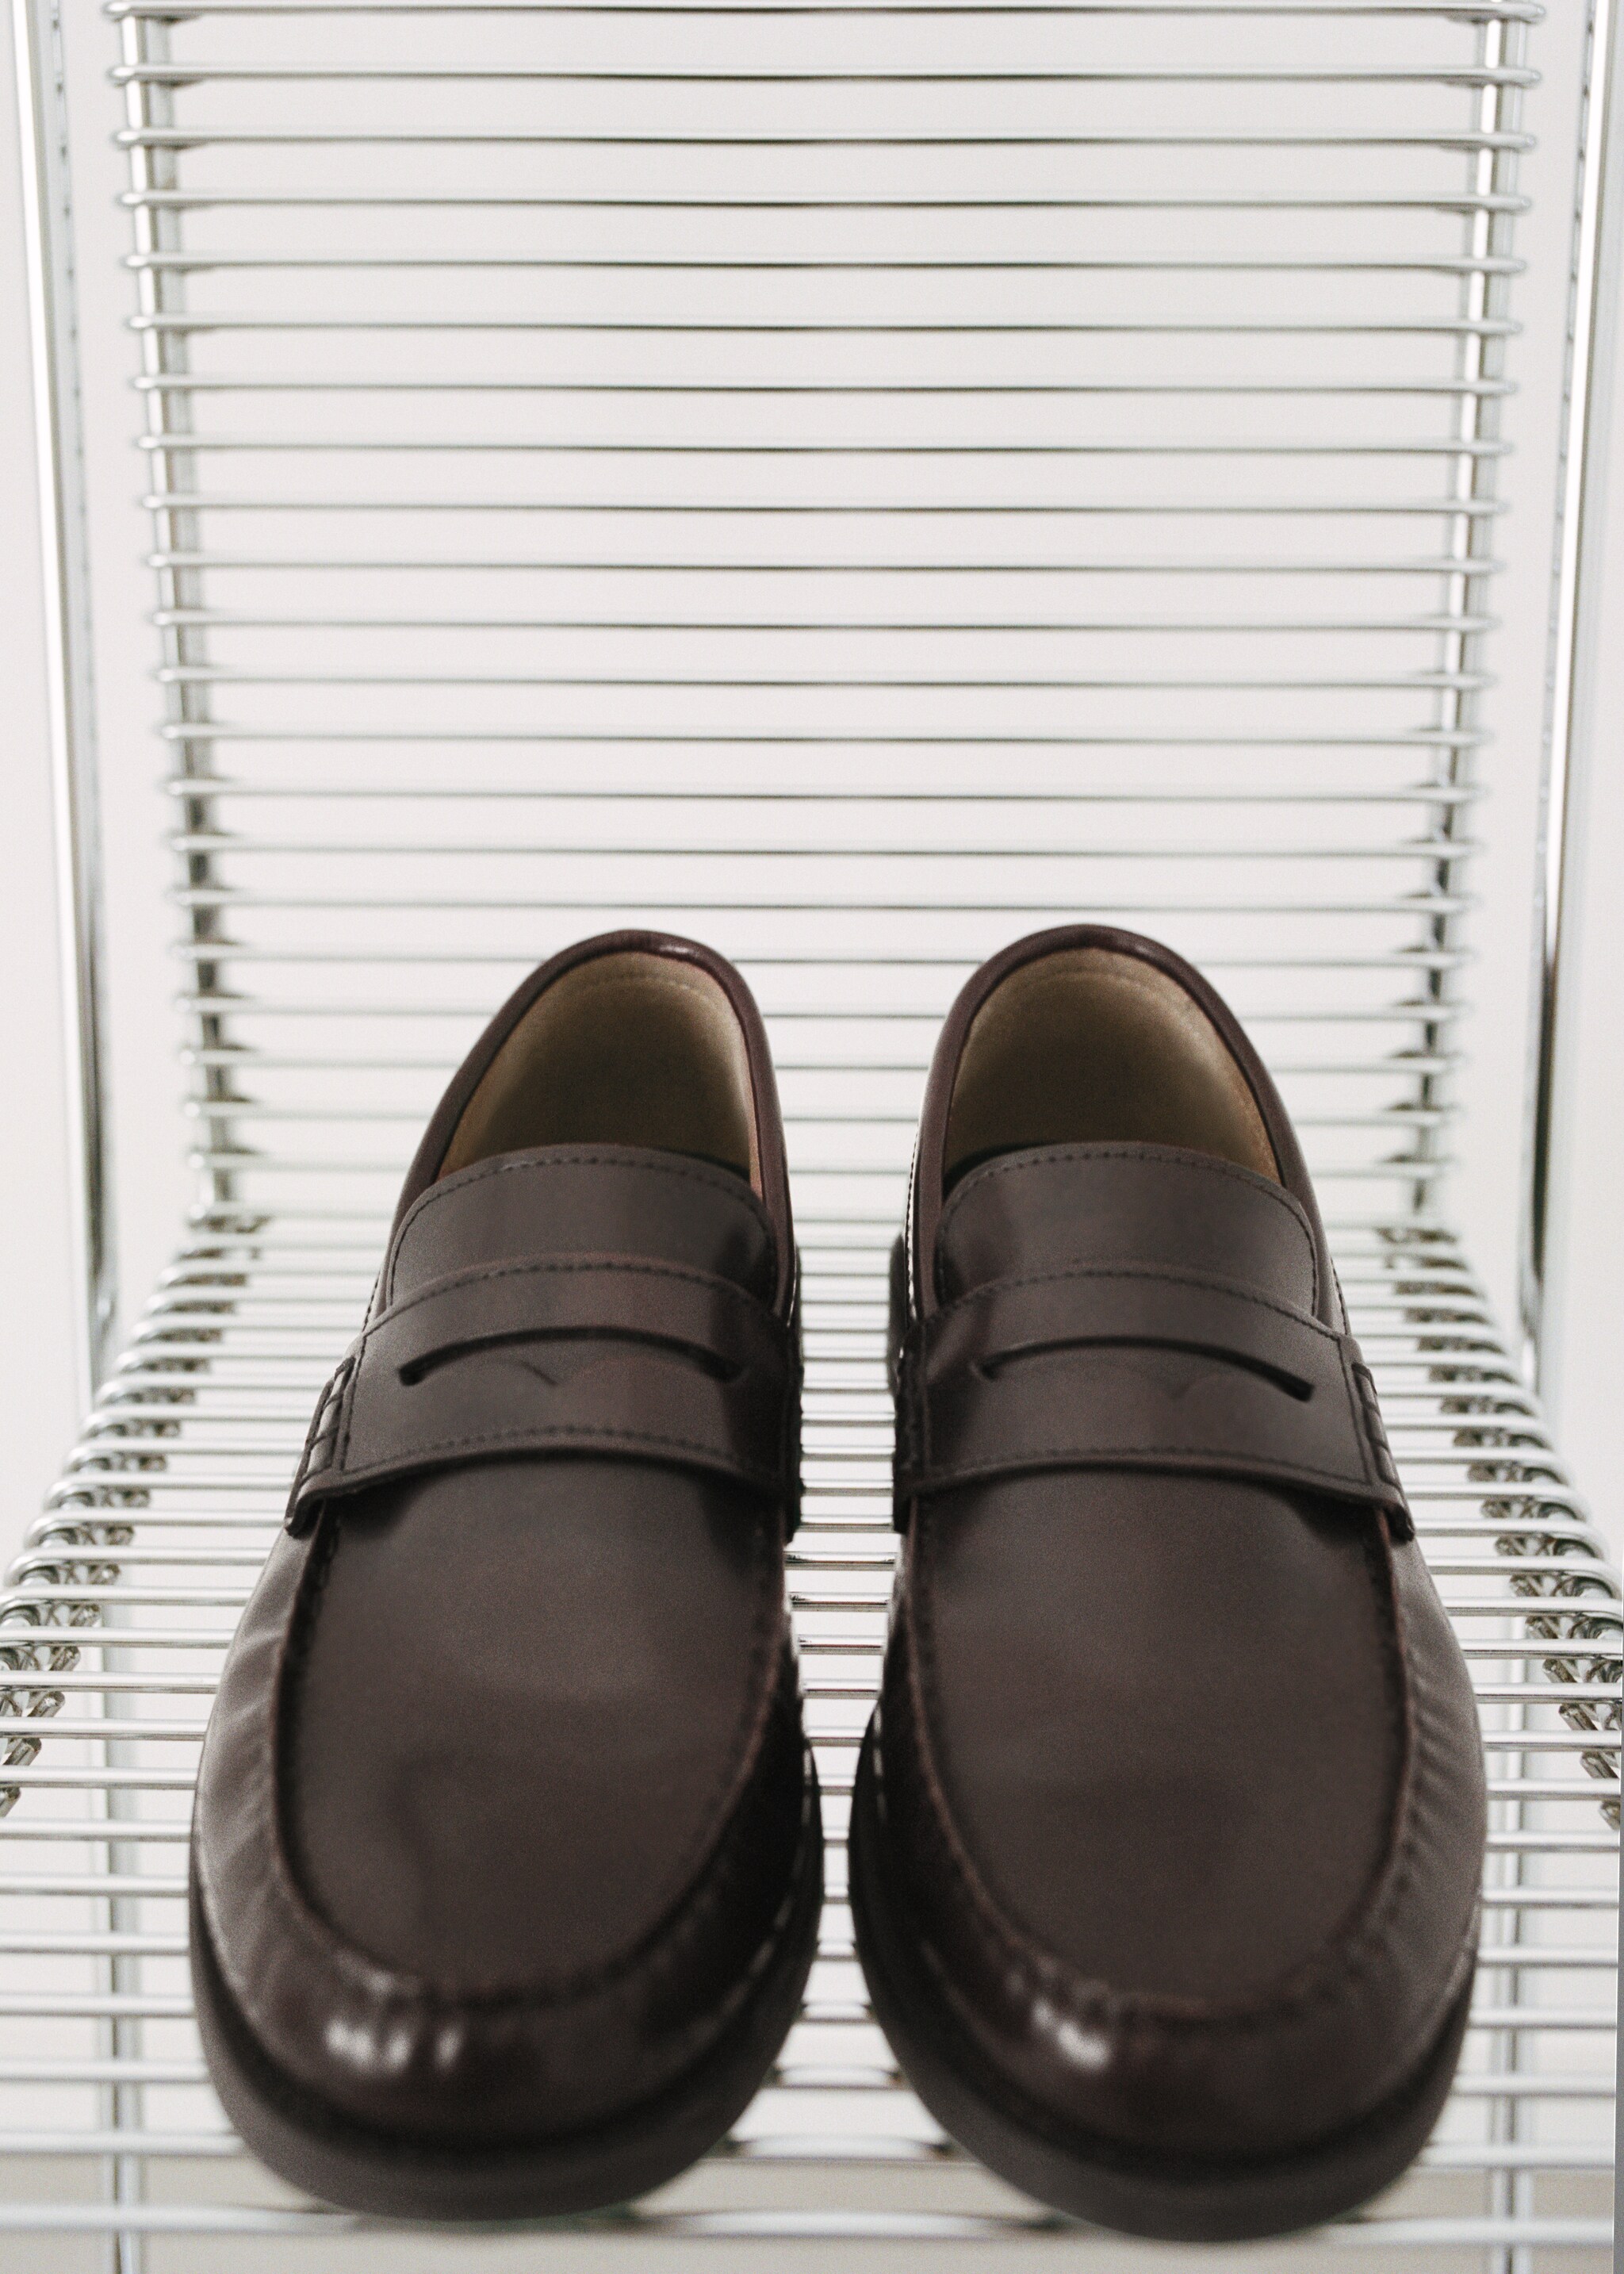 Leather penny loafers - General plane